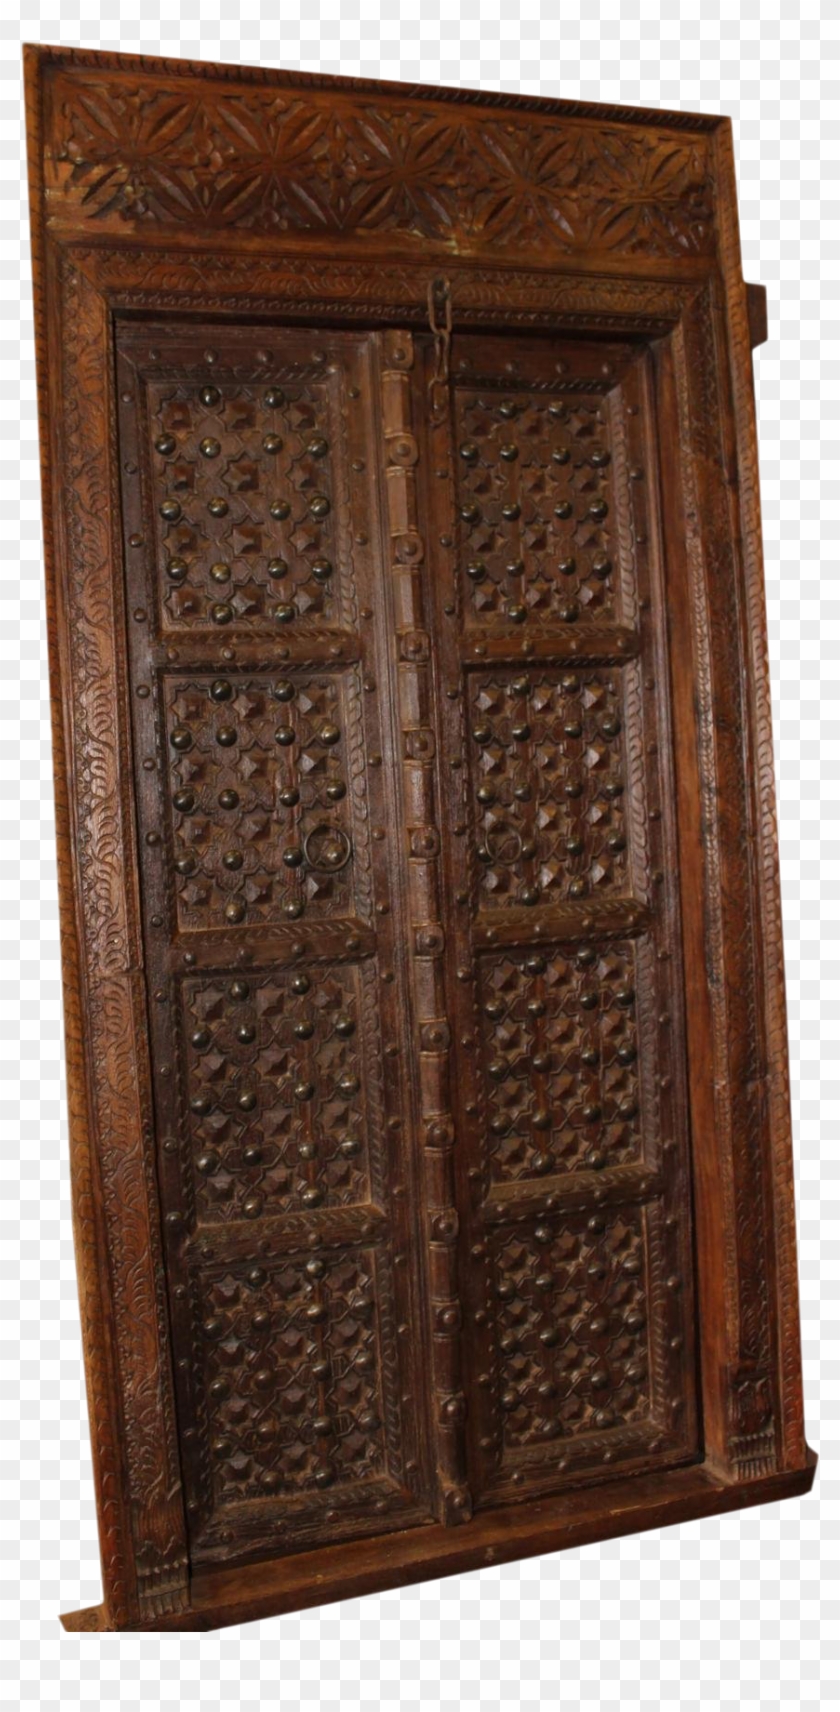 Antique Indian Carved Wooden Door With Metal Fittings - Cupboard Clipart #4277521